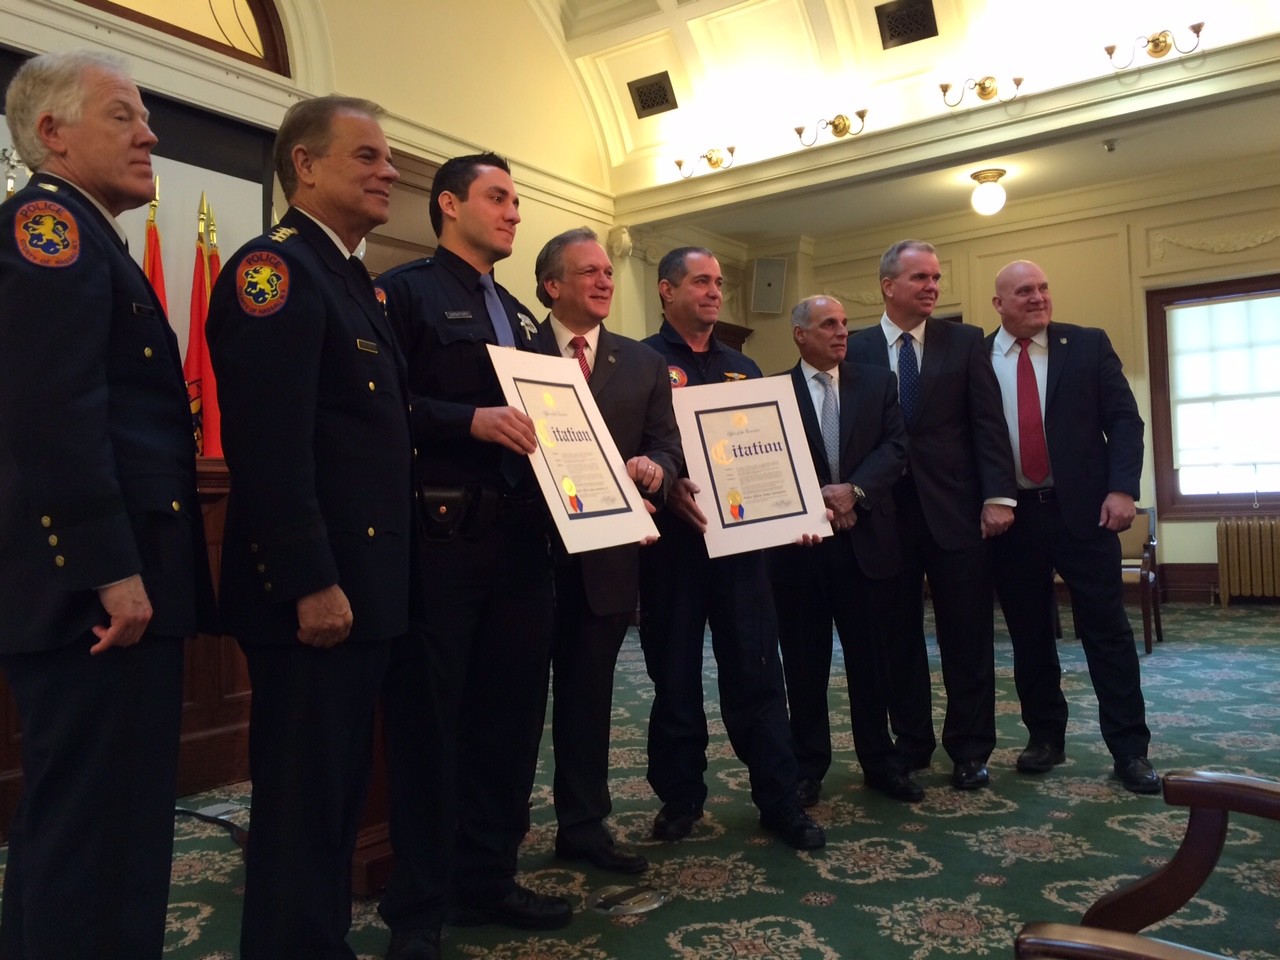 County Executive Ed Mangano honored officers James Sarnataro Jr., third from left, and James Sarnataro Sr., for their parts in the rescue of a drowning man.